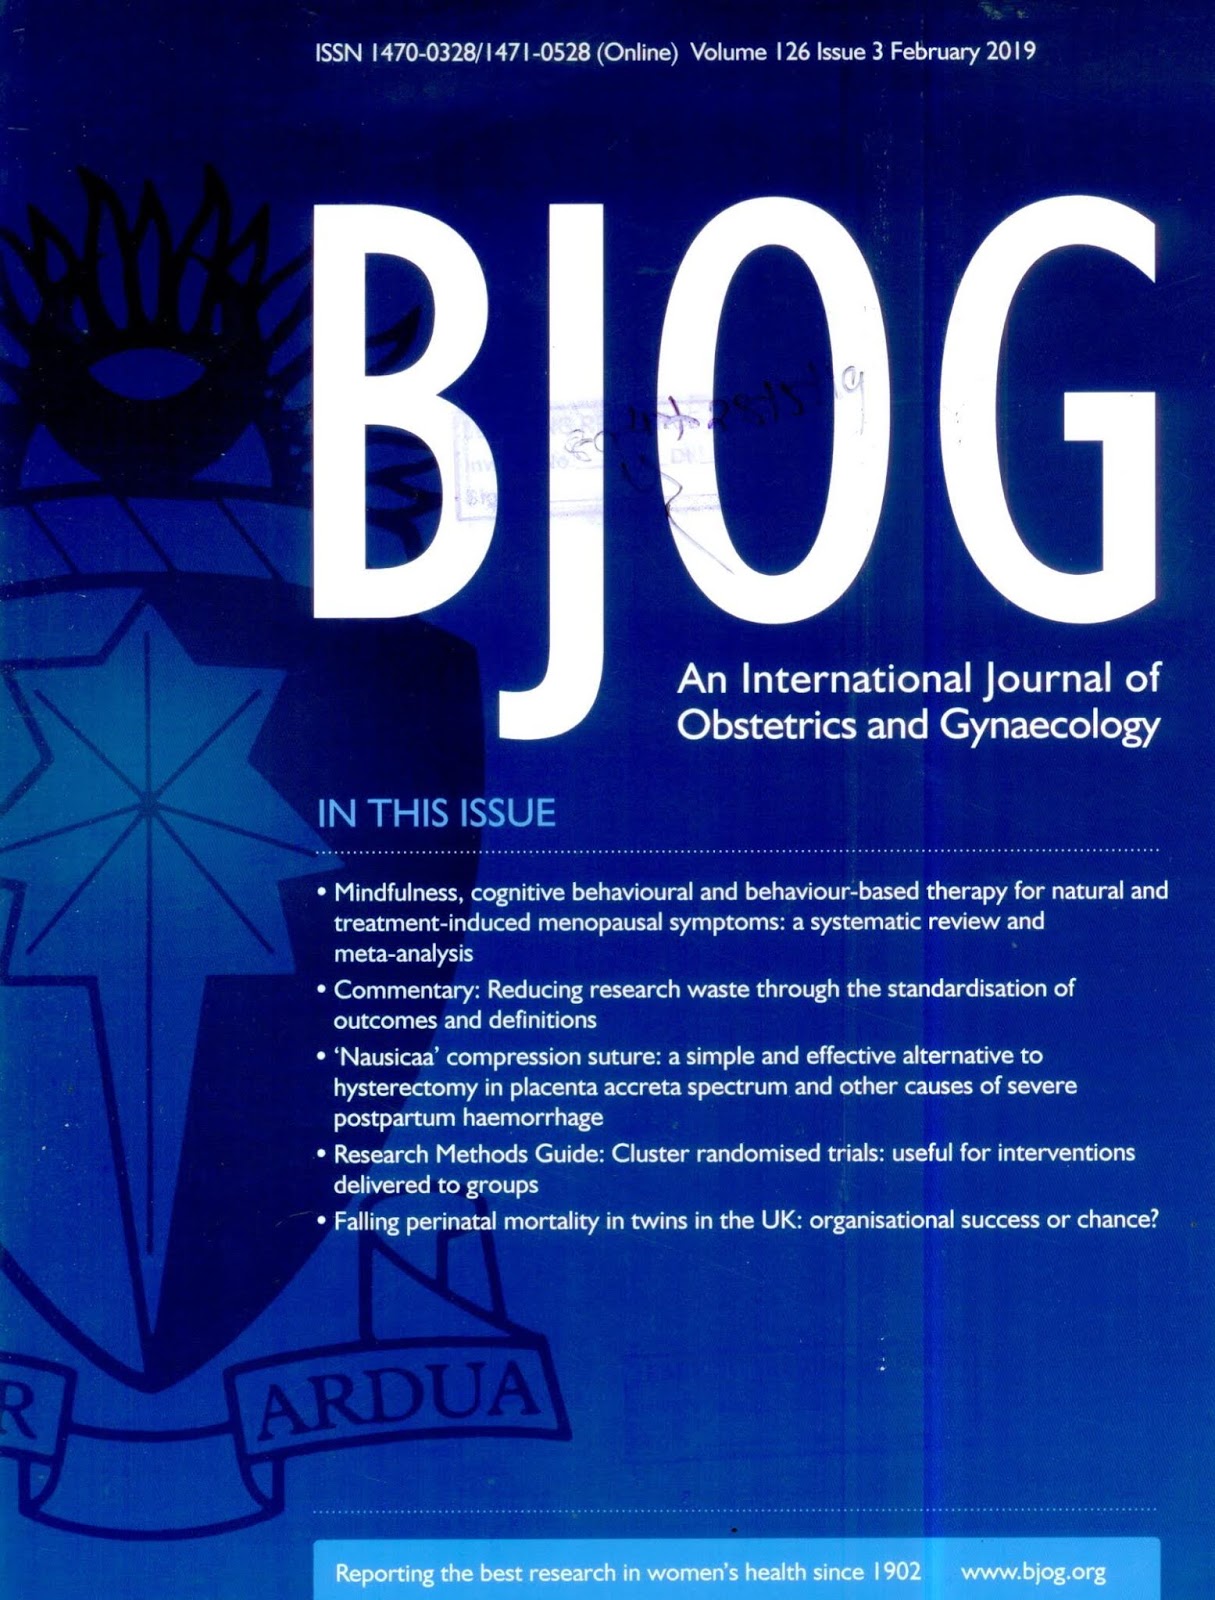 https://obgyn.onlinelibrary.wiley.com/toc/14710528/2019/126/3